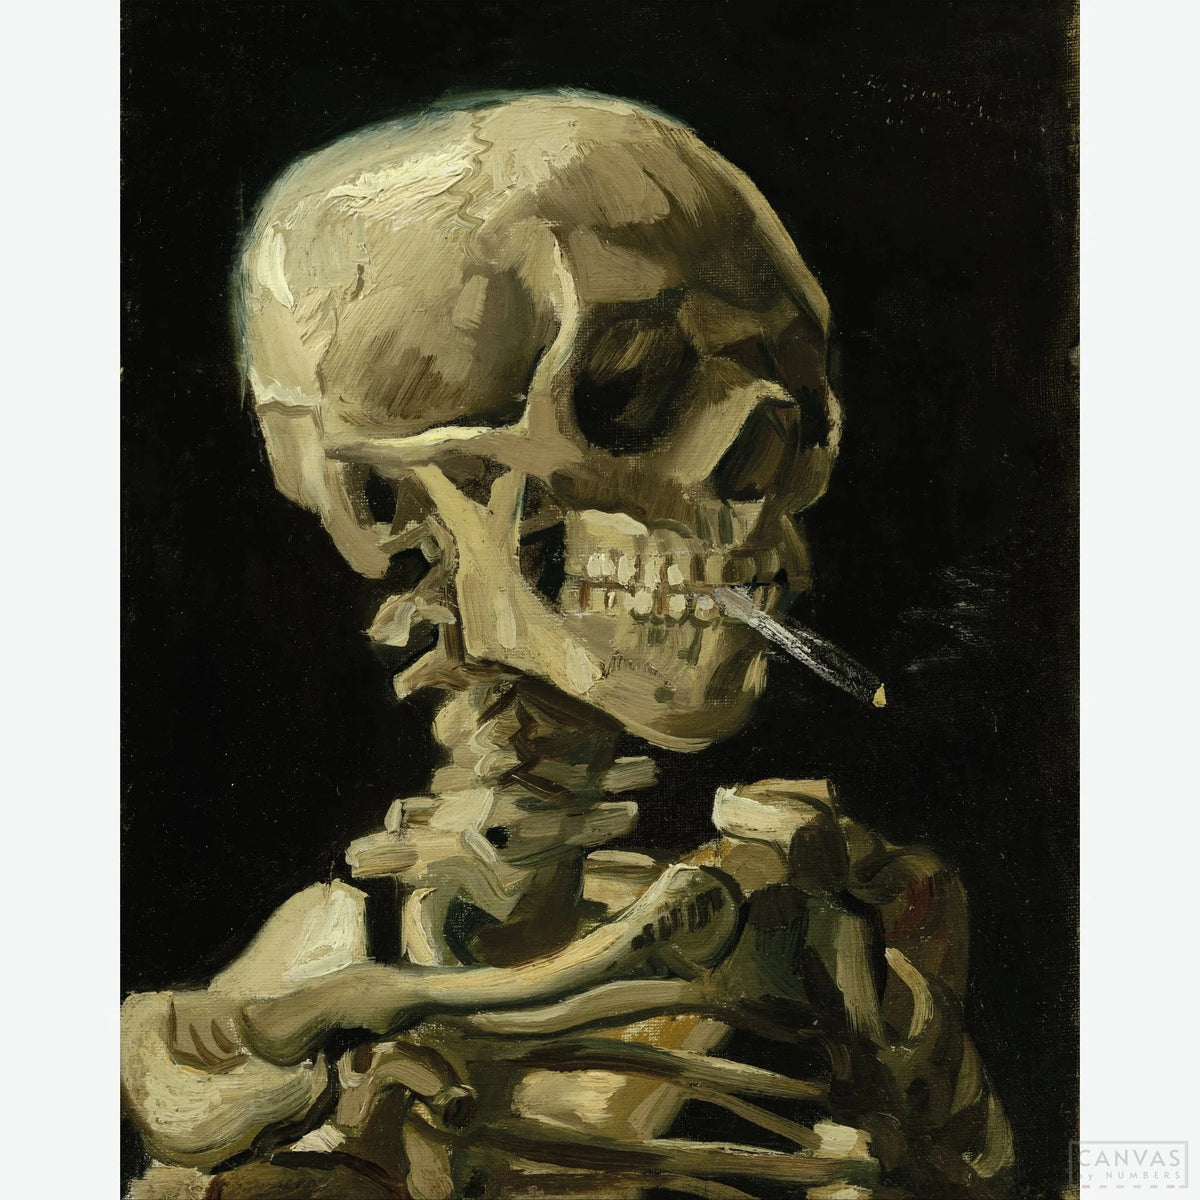 Van Gogh’s Skeleton Smoking - Diamond Painting Kit-Van Gogh's unique Skull of a Skeleton with Burning Cigarette is a diamond painting kit ideal for art enthusiasts seeking a different side of the master.-Canvas by Numbers